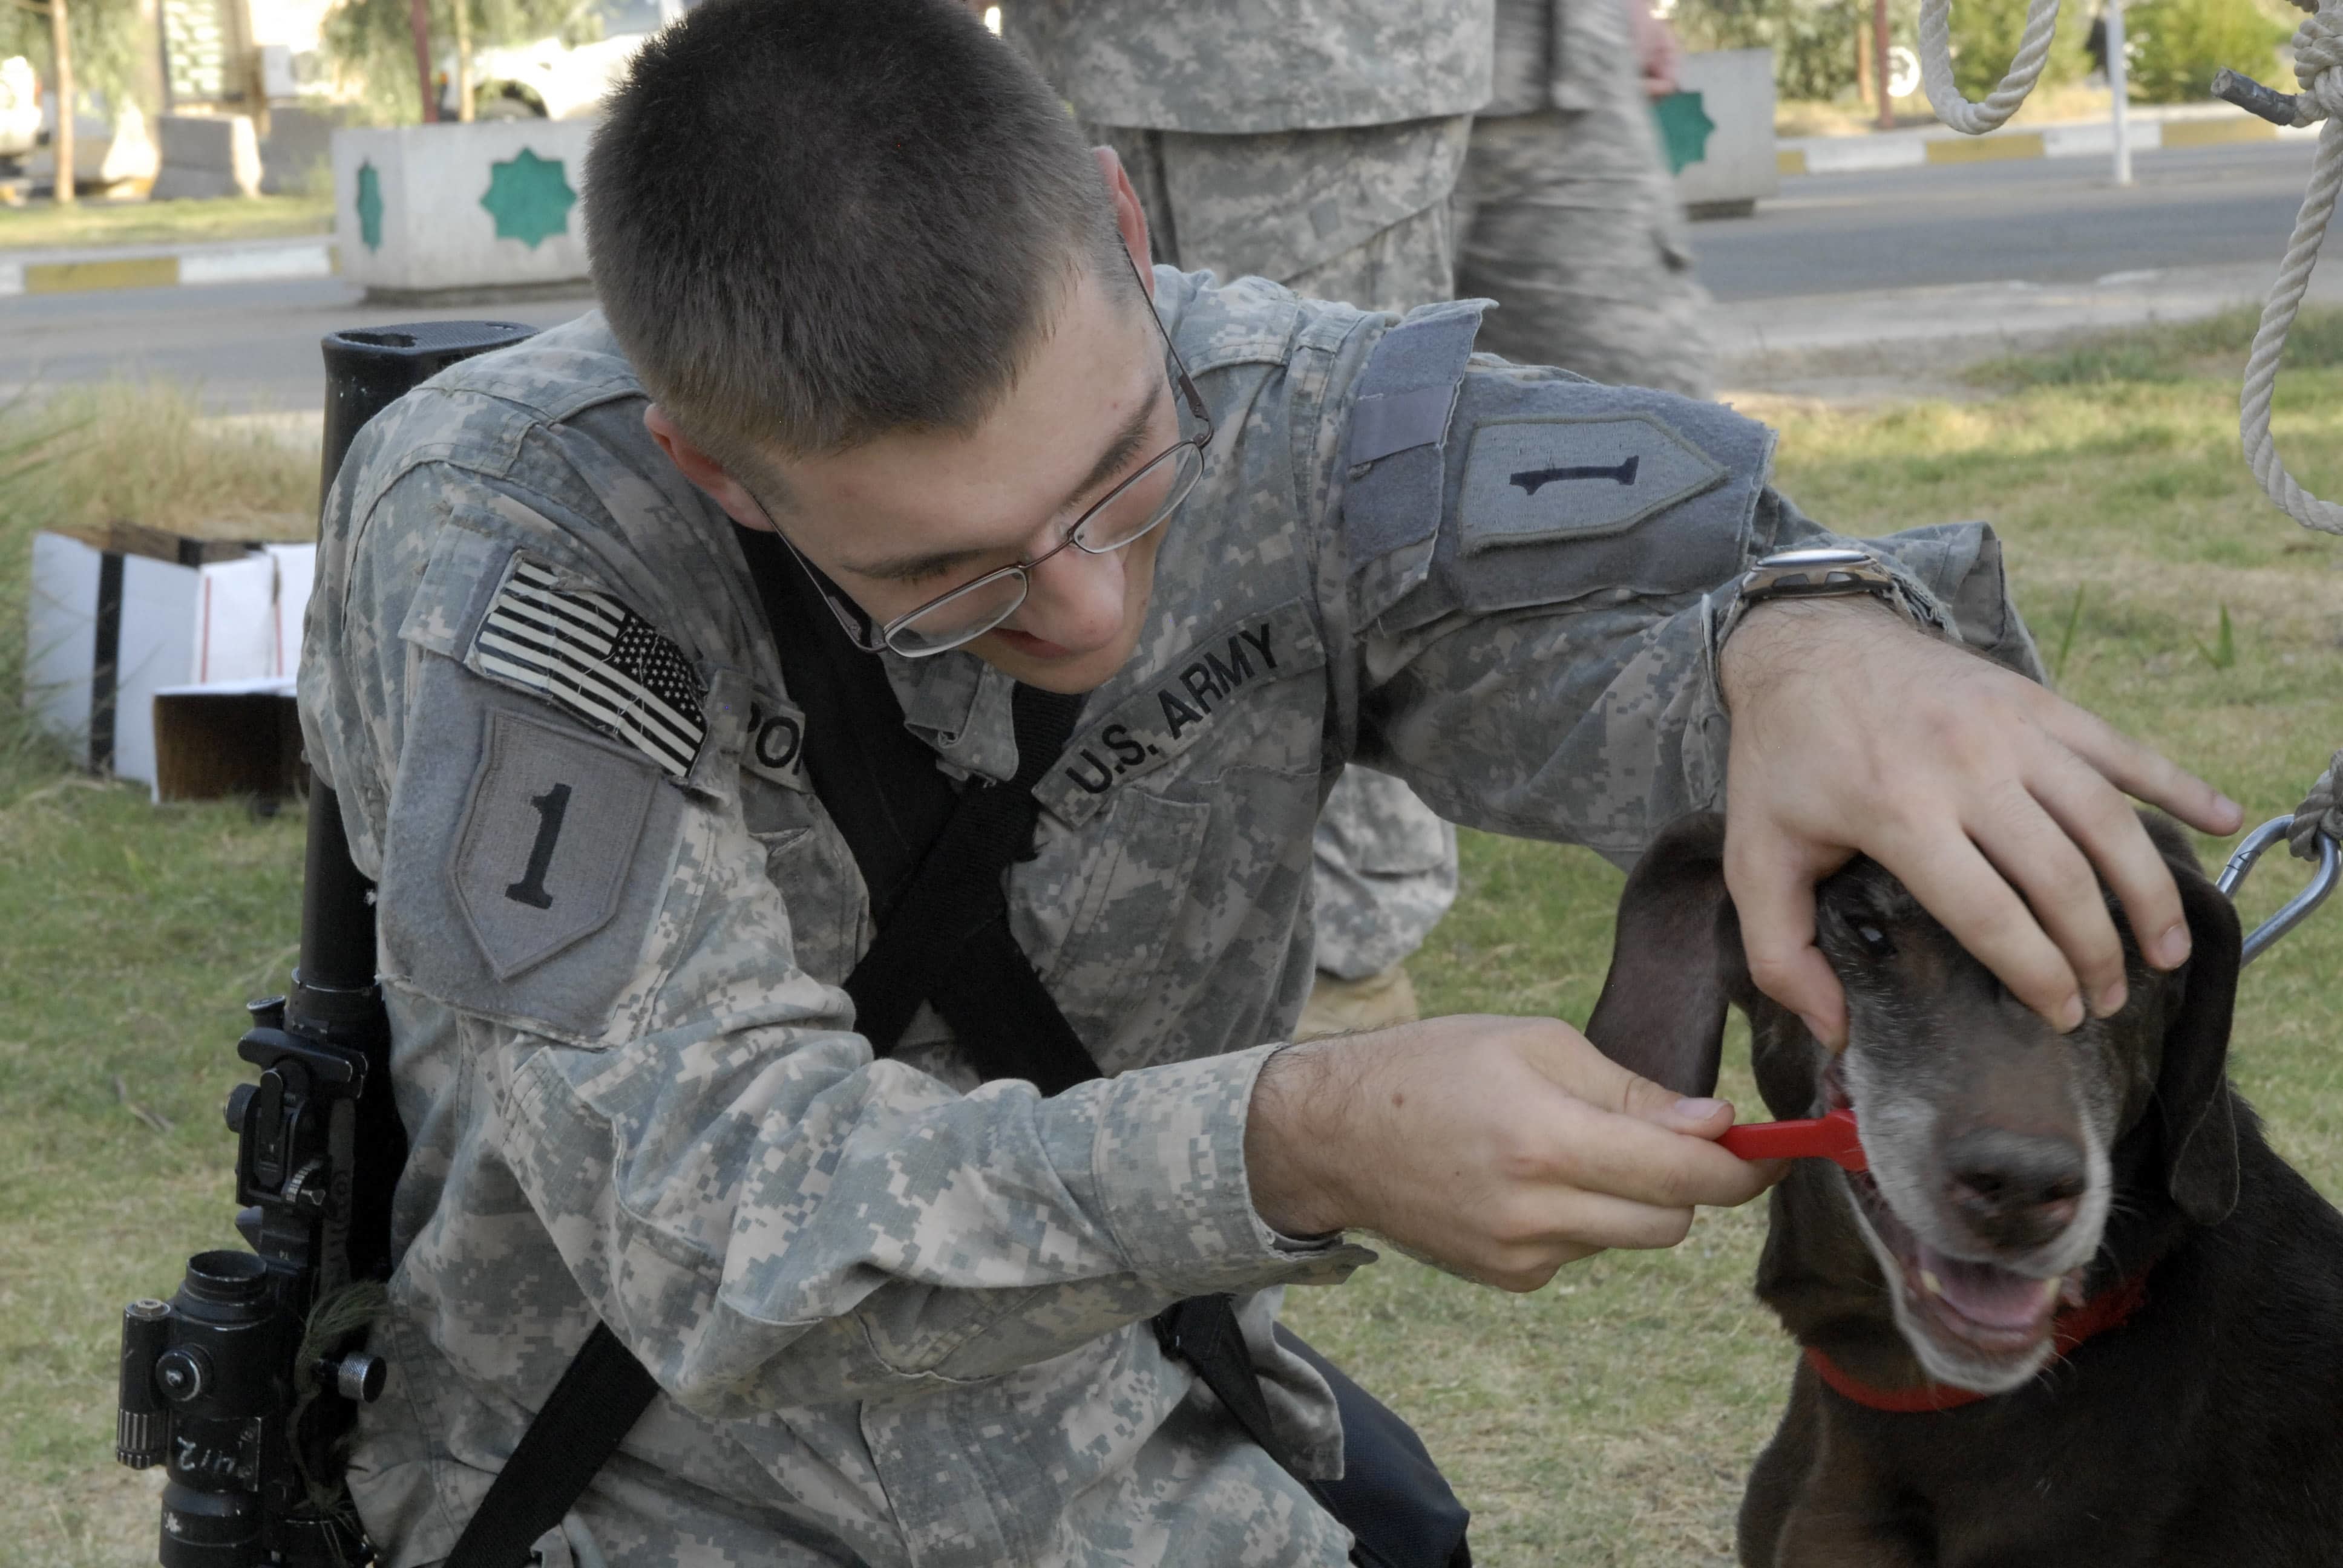 Army troop cleaning guard dog's teeth with a toothbrush